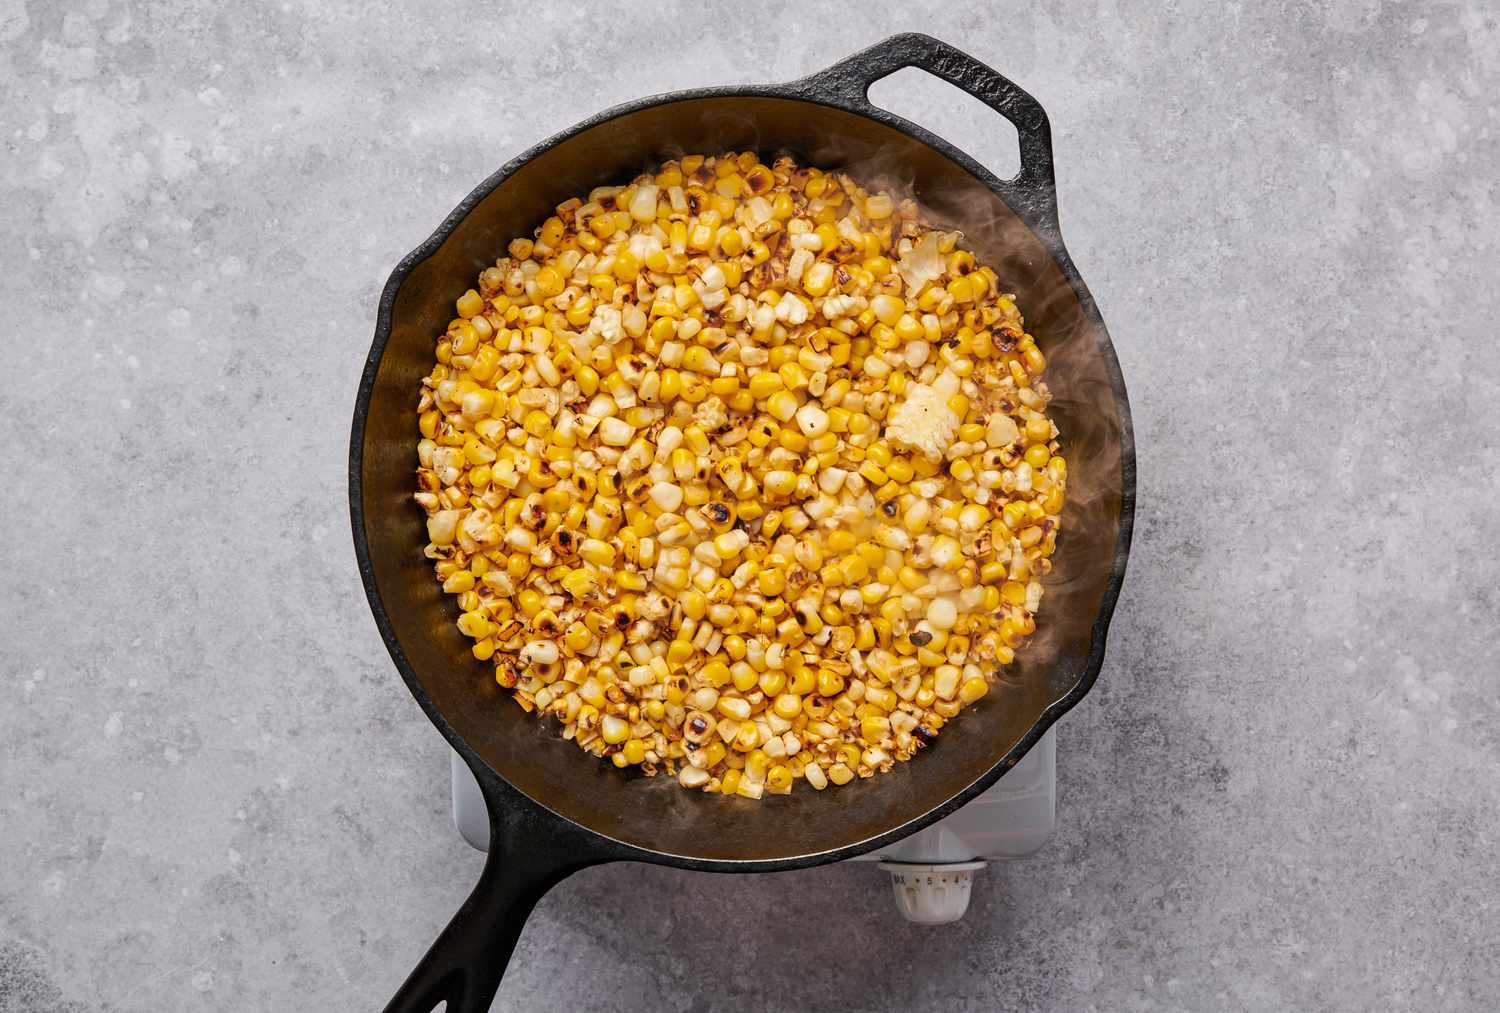 A large skillet of charred corn